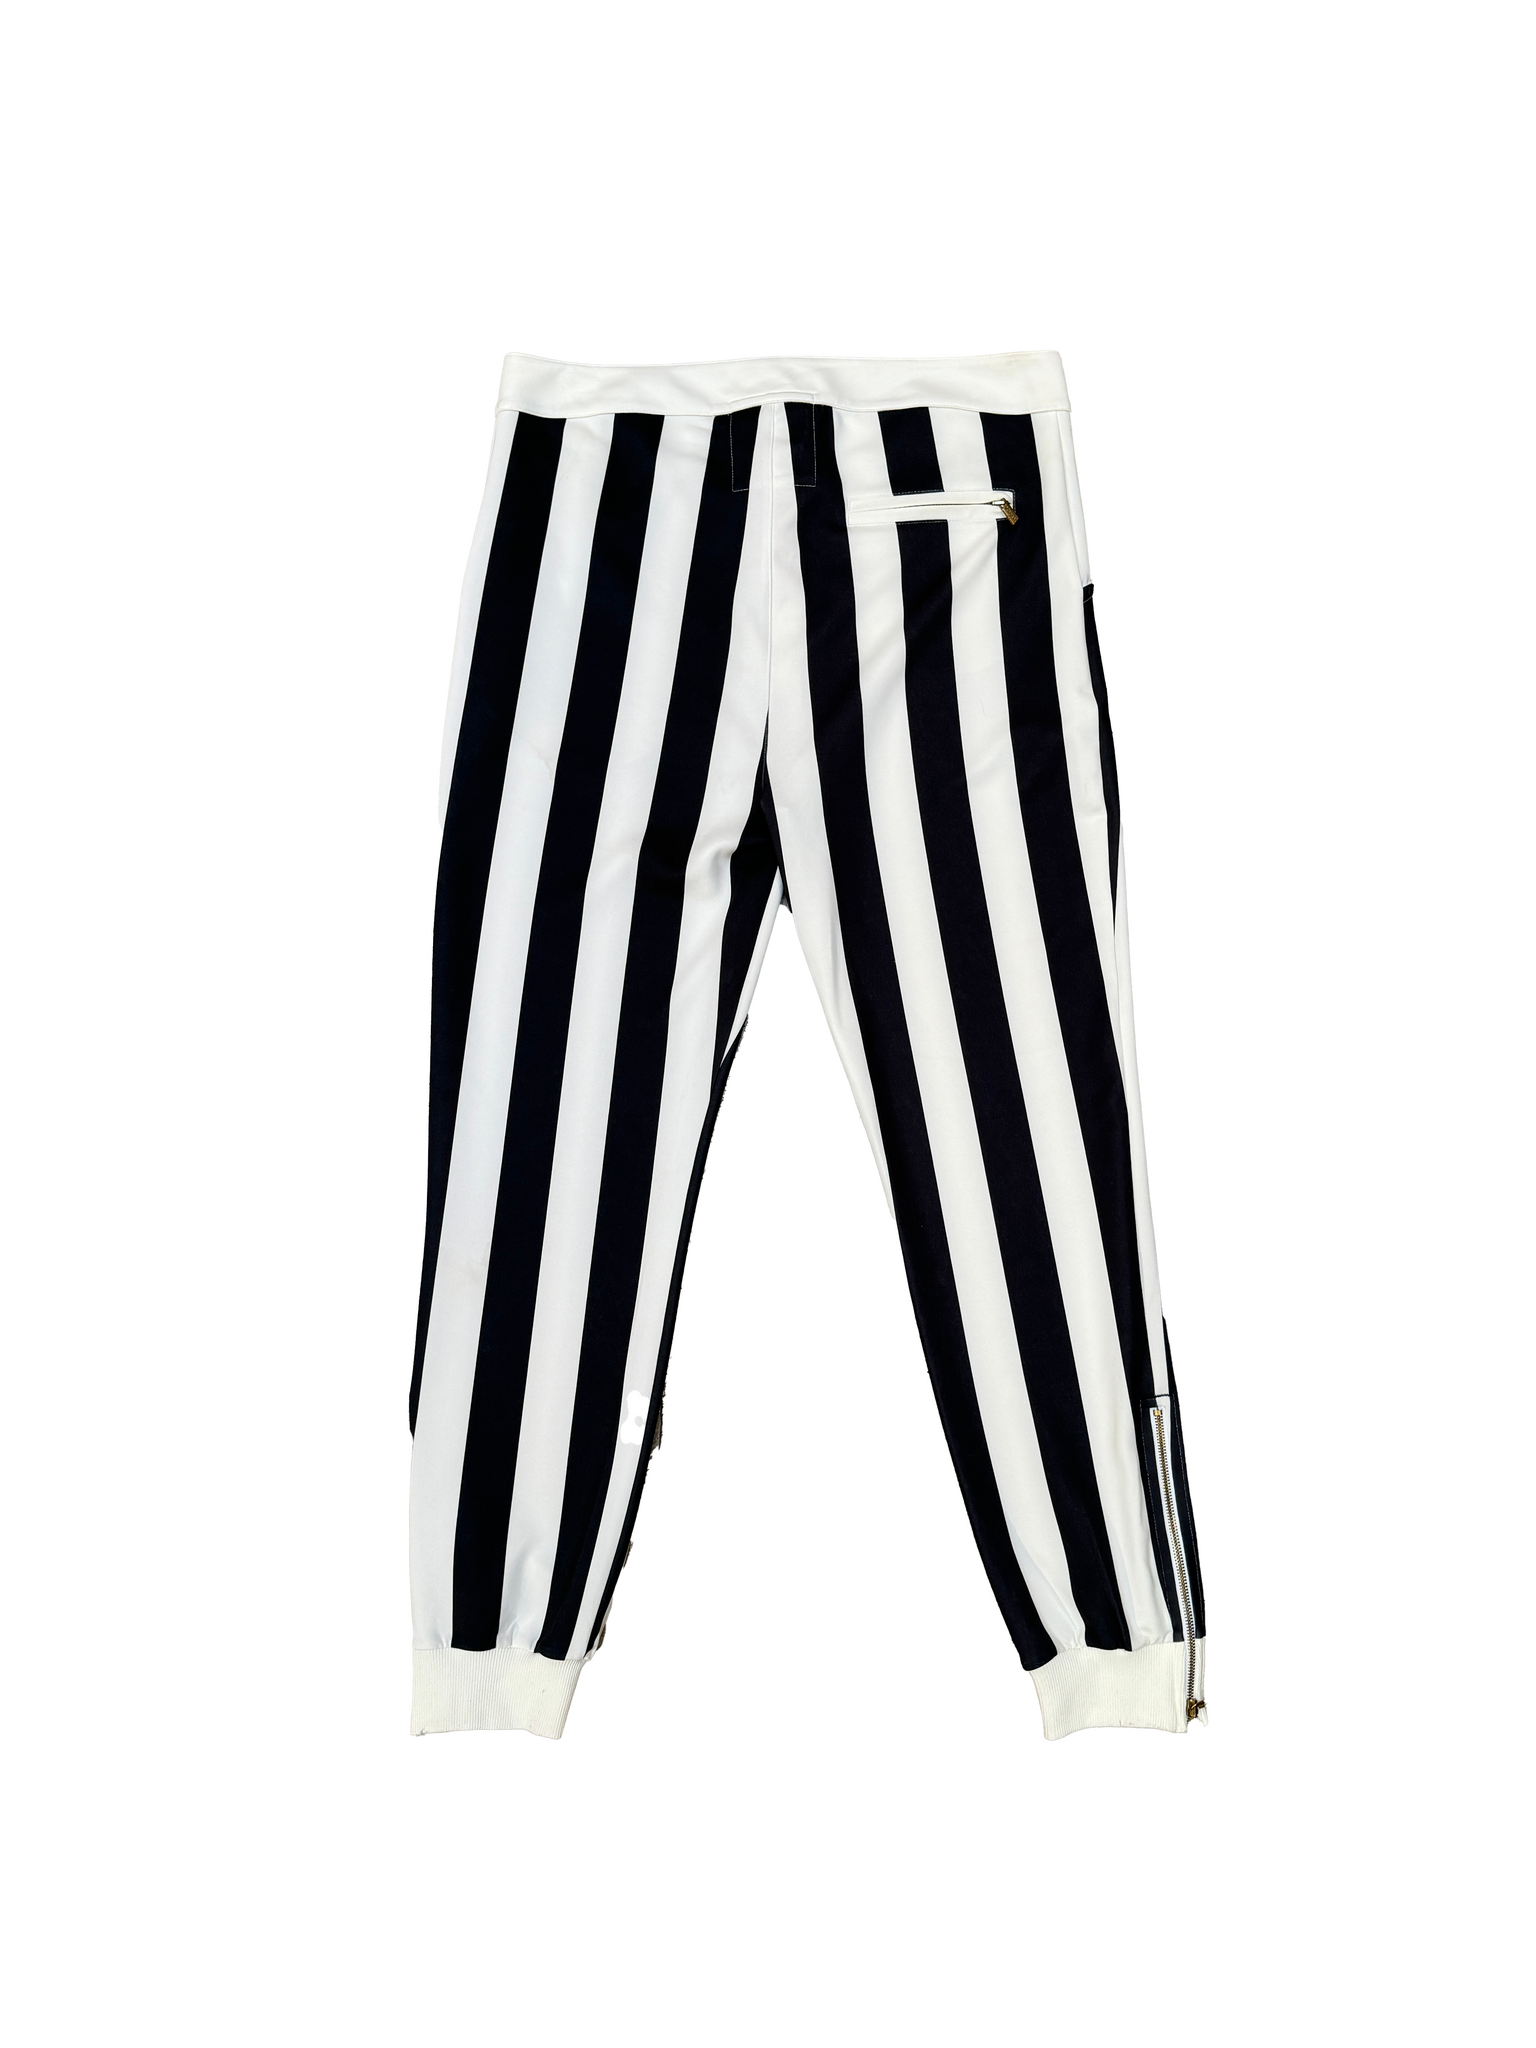 KP AUTHENTIC STRIPES TROUSERS